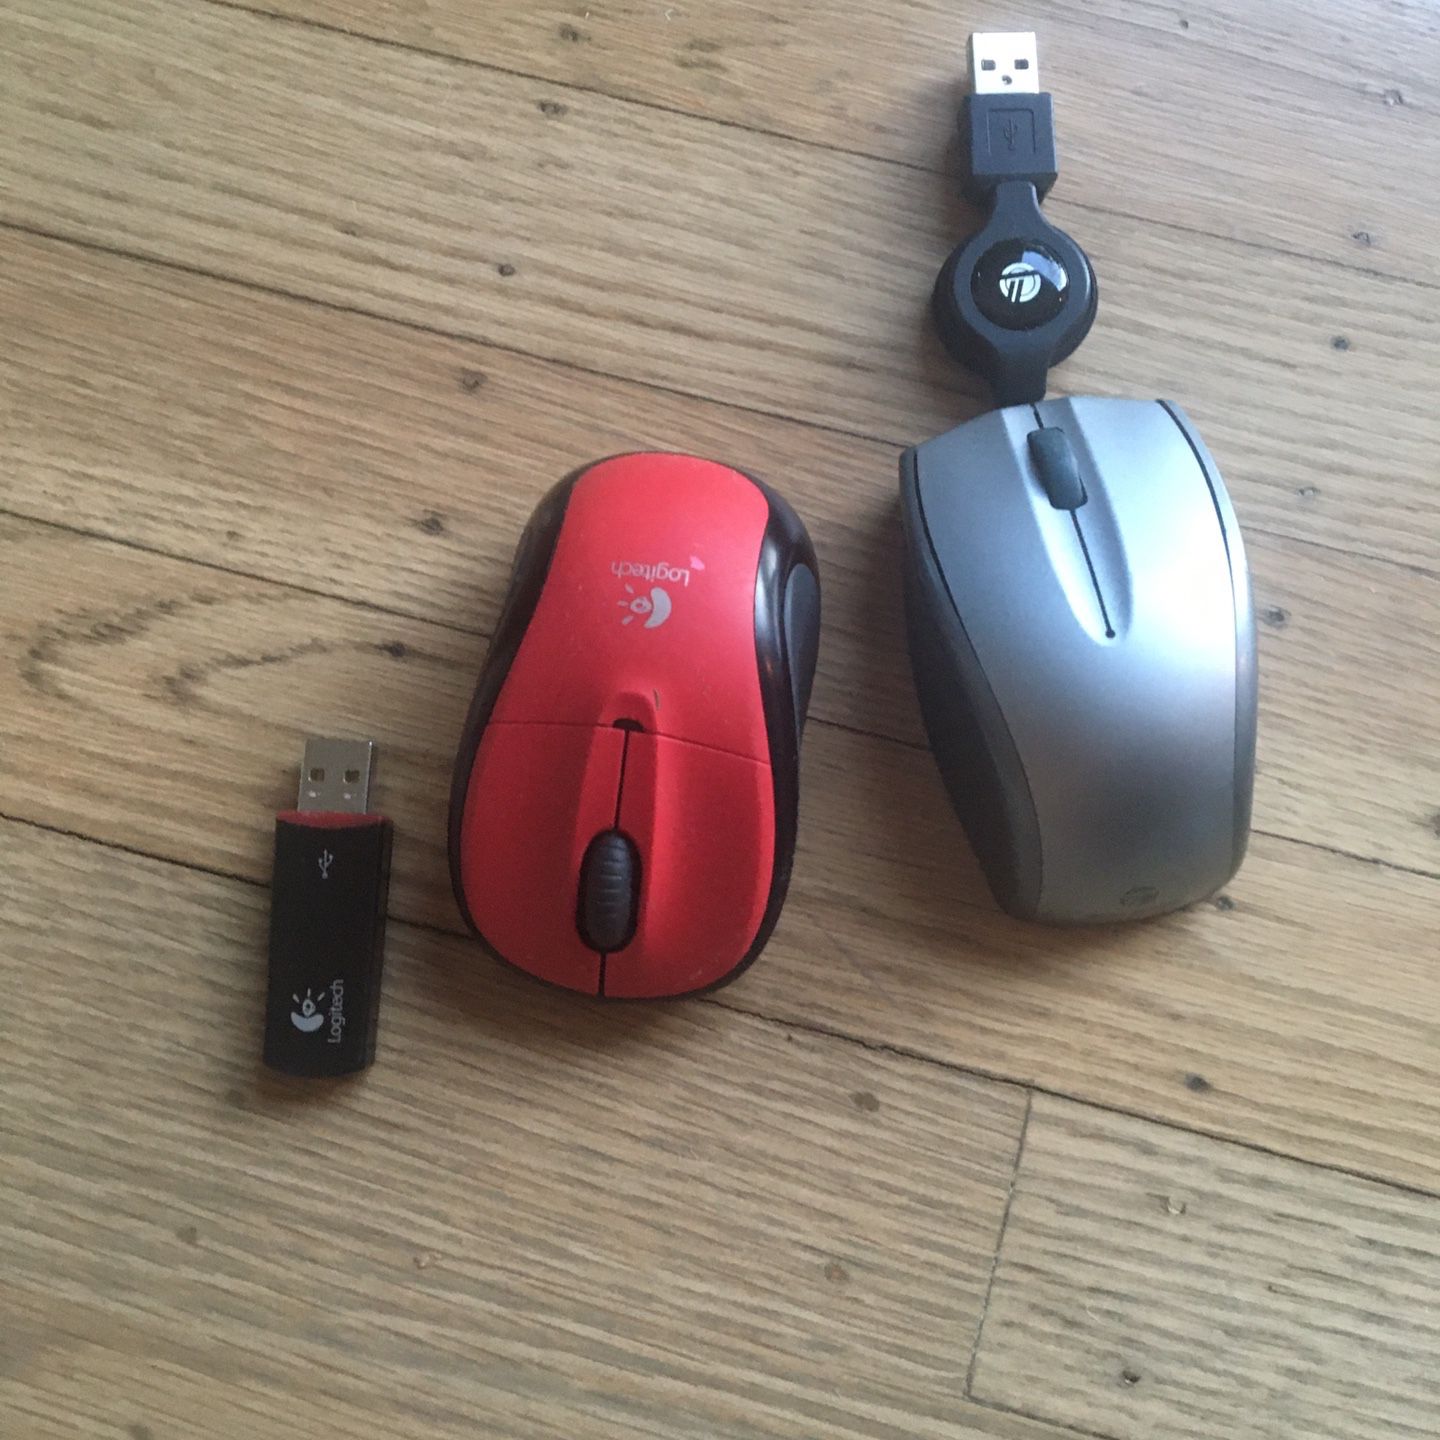 Free Logitech Optical And Targus Wired Mice